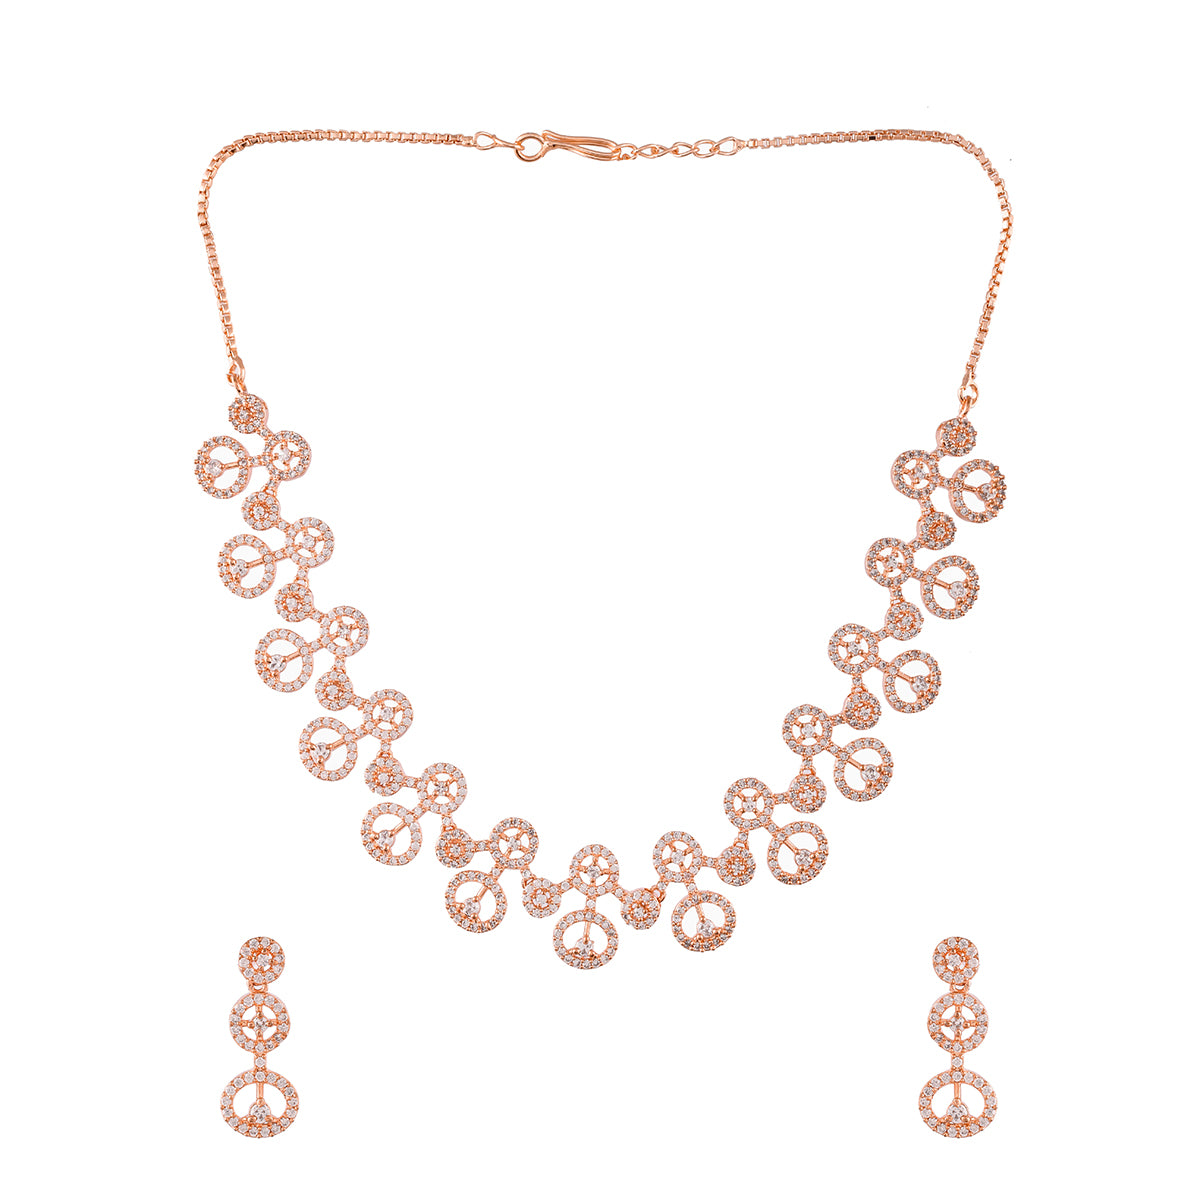 A Finishing Touch Jewelry Paparazzi Extravagant Elegance - Copper Necklace